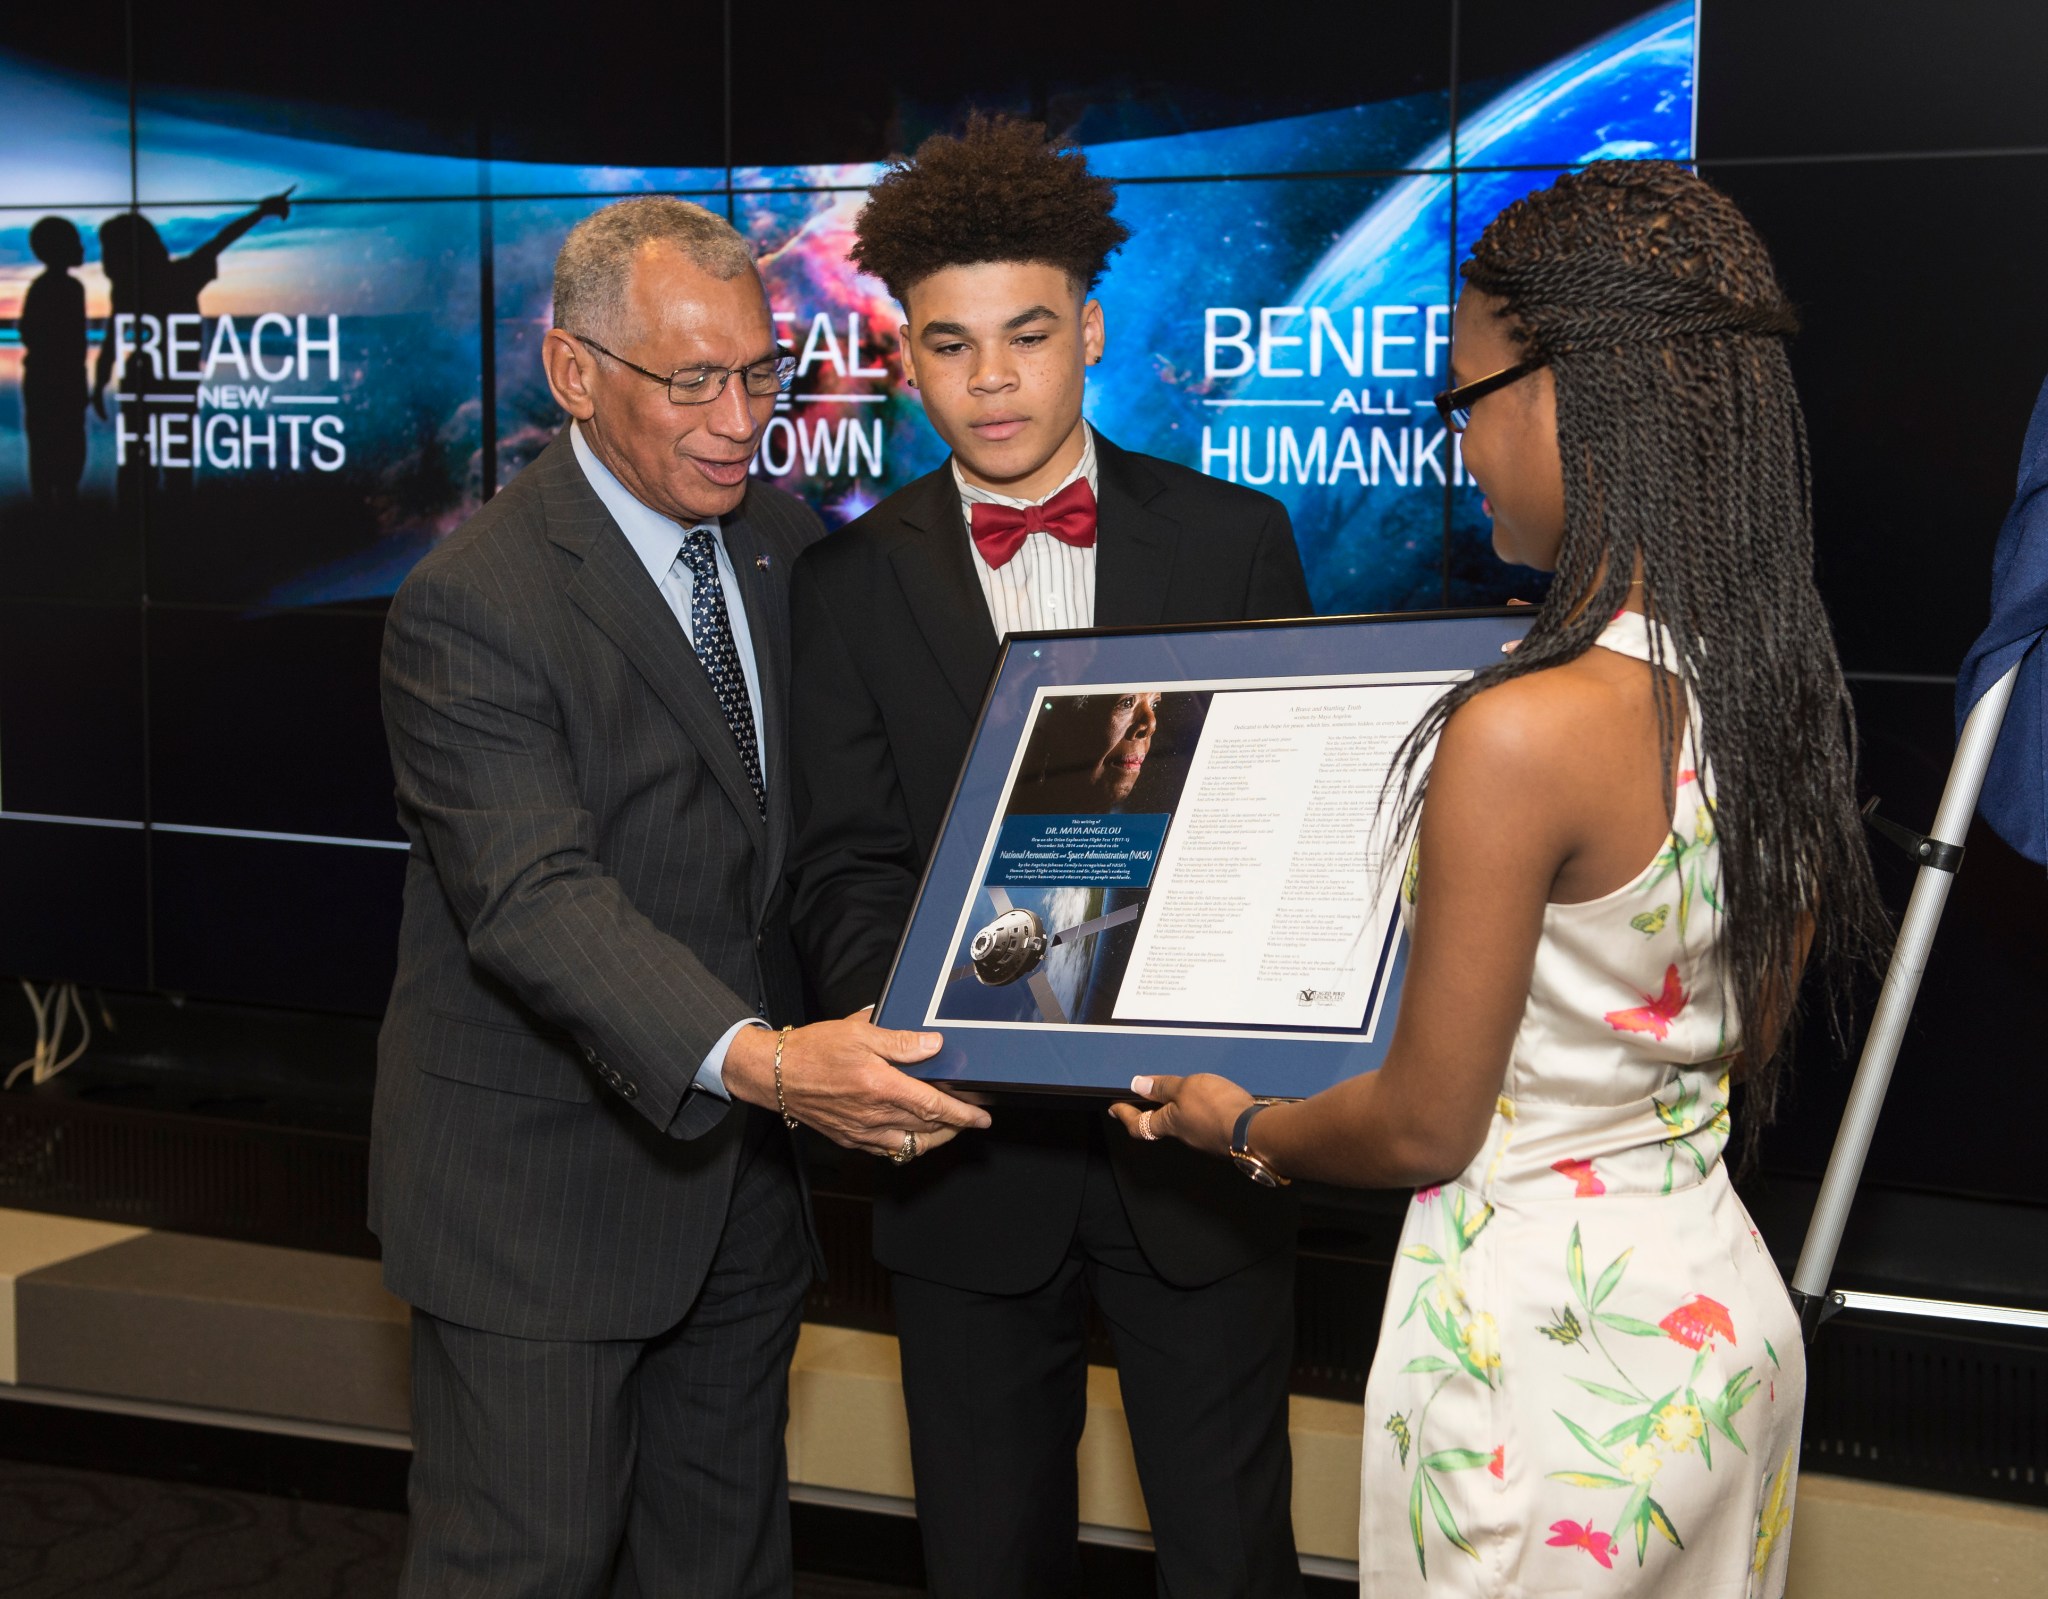 NASA Adminstrator Bolden accepts framed piece of writing with image